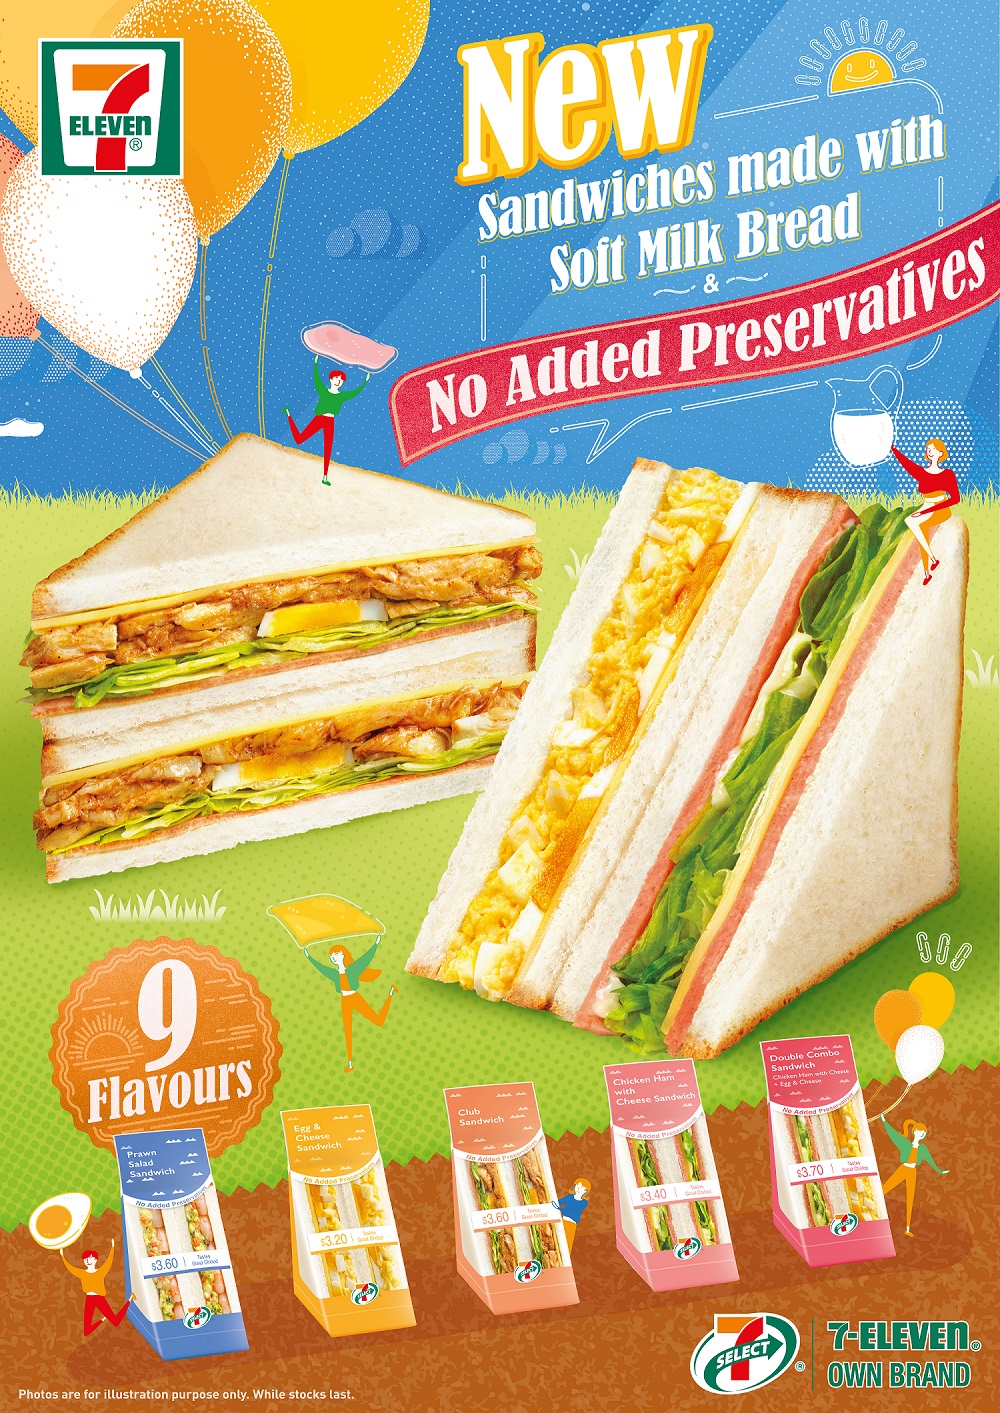 Sink your teeth into the new and improved range of 7-SELECT Sandwiches, made with exclusive Milk Bread and No Added Preservatives!